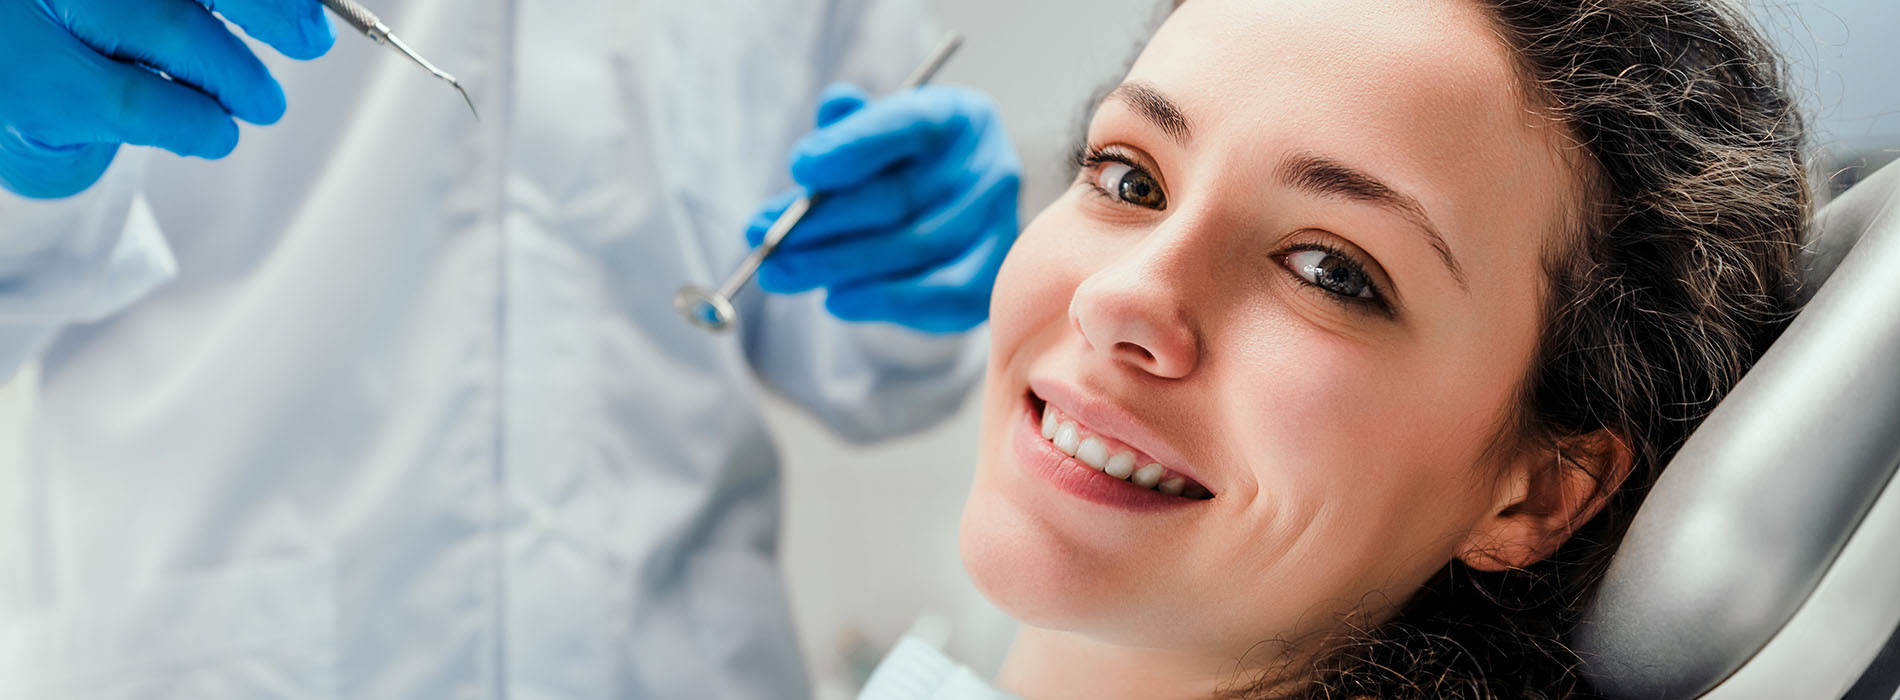 Woman receiving dental care with a smiling expression, surrounded by dental professionals in a sterile environment.